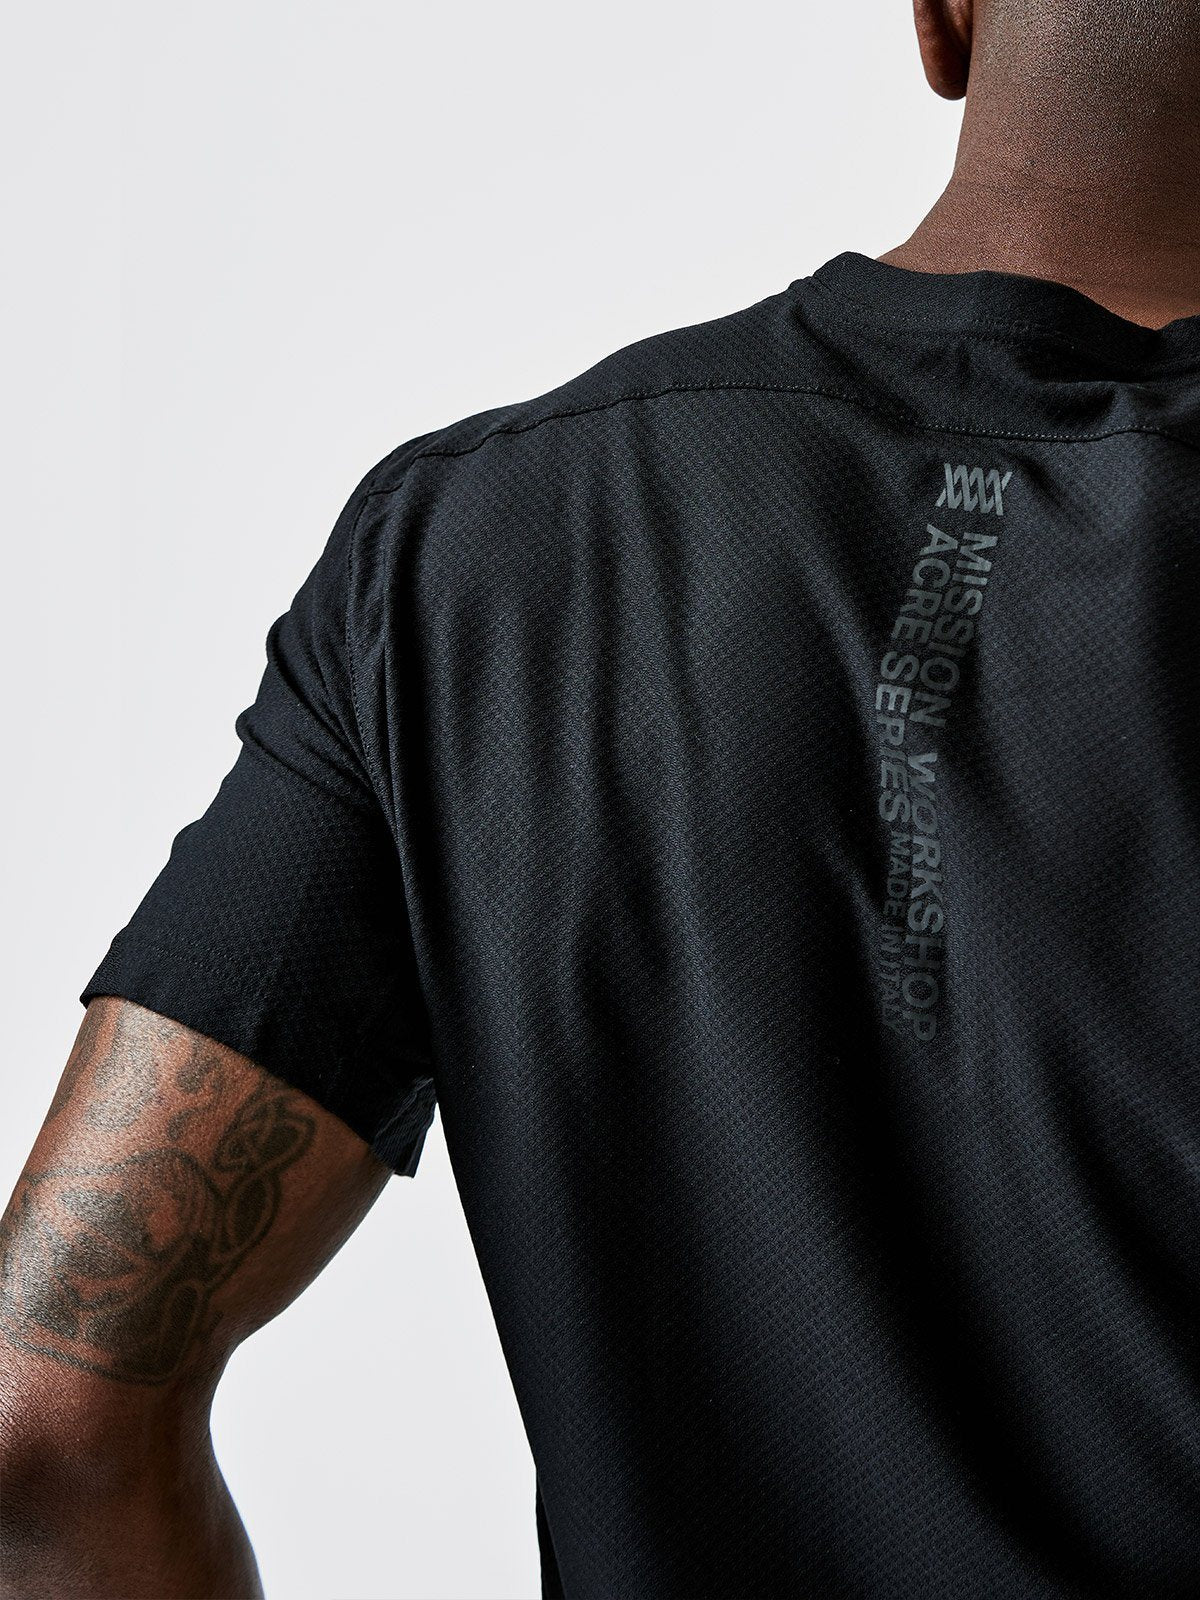 Mission Pro Tech Tee Men's by Mission Workshop - Weatherproof Bags & Technical Apparel - San Francisco & Los Angeles - Built to endure - Guaranteed forever